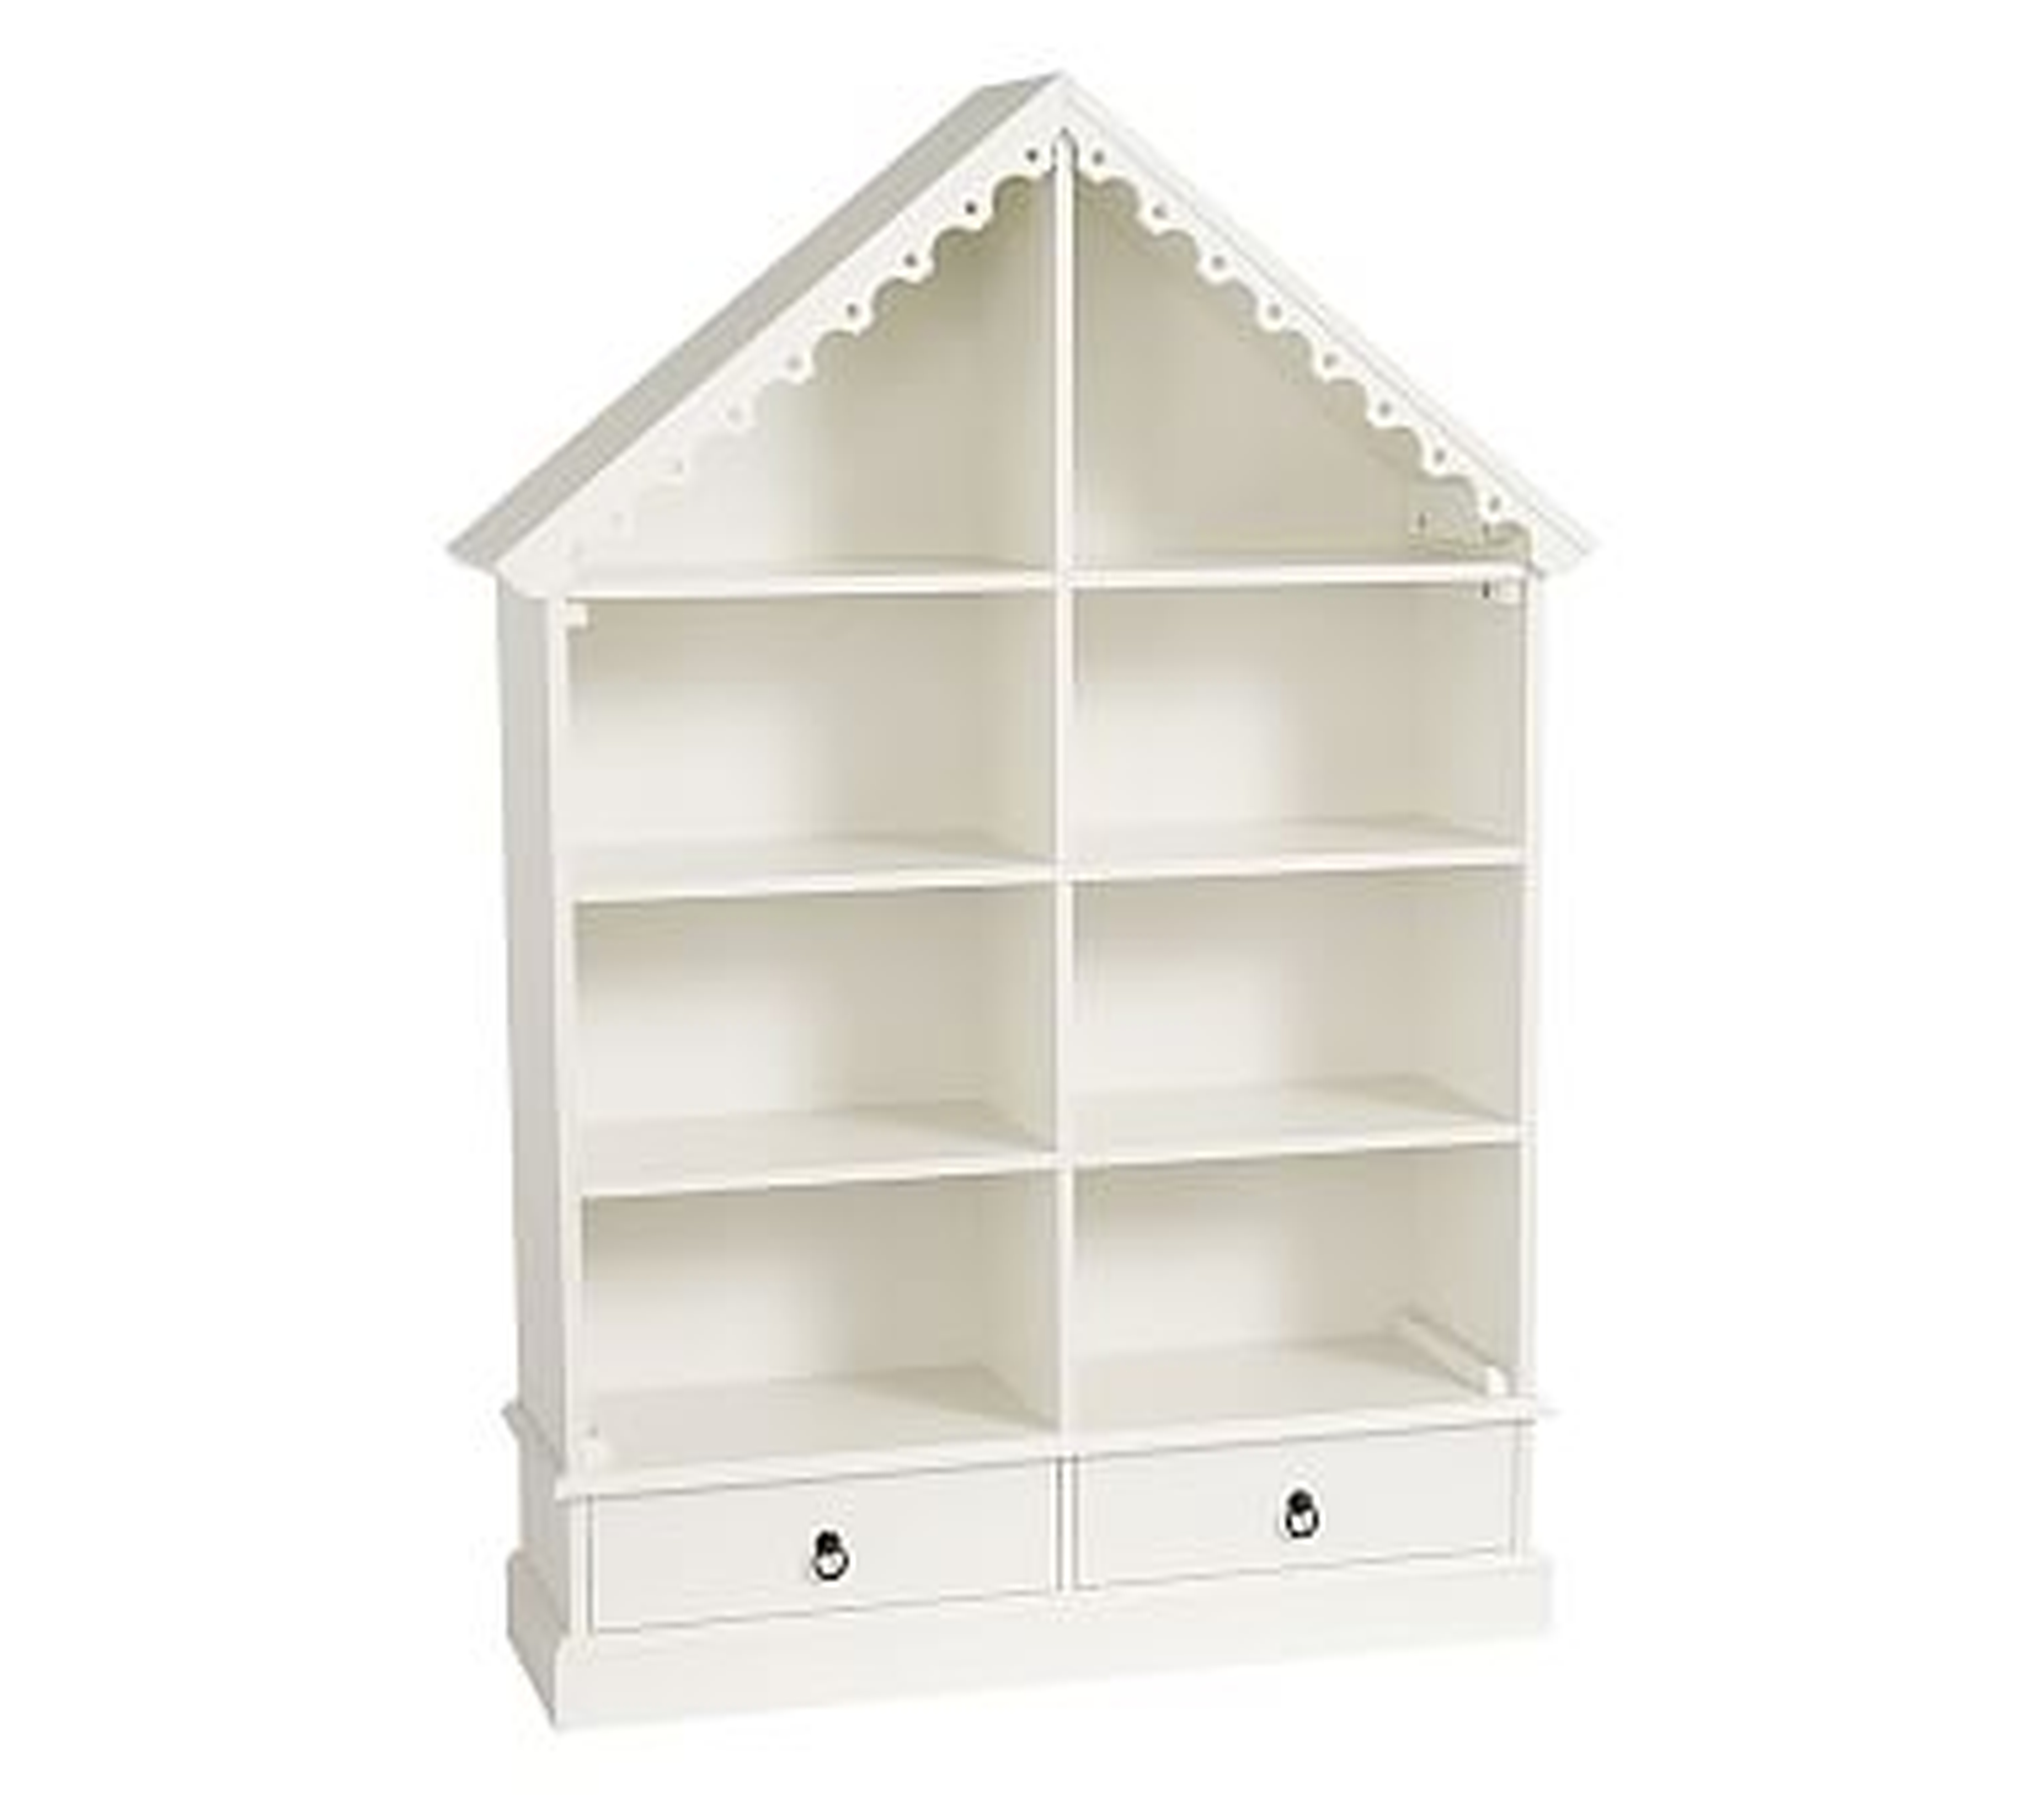 Dollhouse Bookcase, Simply White, UPS - Pottery Barn Kids